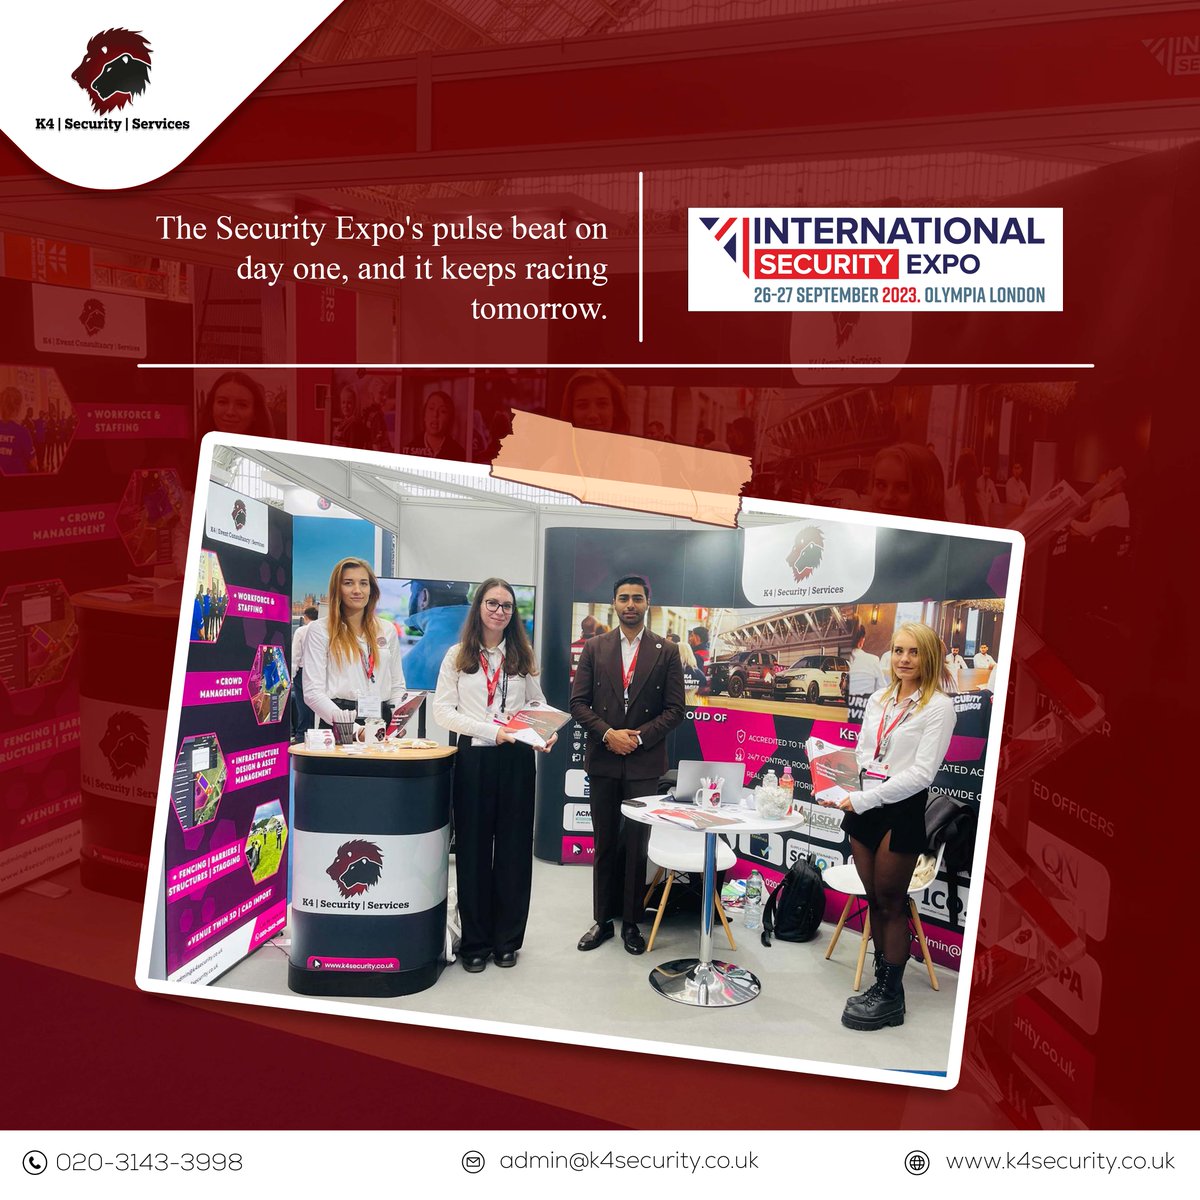 Join us at Stand E80 for more exciting conversations and insights. See you there!

#SecurityExpoSuccess #MeetingClients #BuildingPartnerships #NewConnections #EnergizingDiscussions #ExpoHighlights #TomorrowAwaits #EnhancingSecurity #ExploreTogether #StandE80 #K4SecurityServices